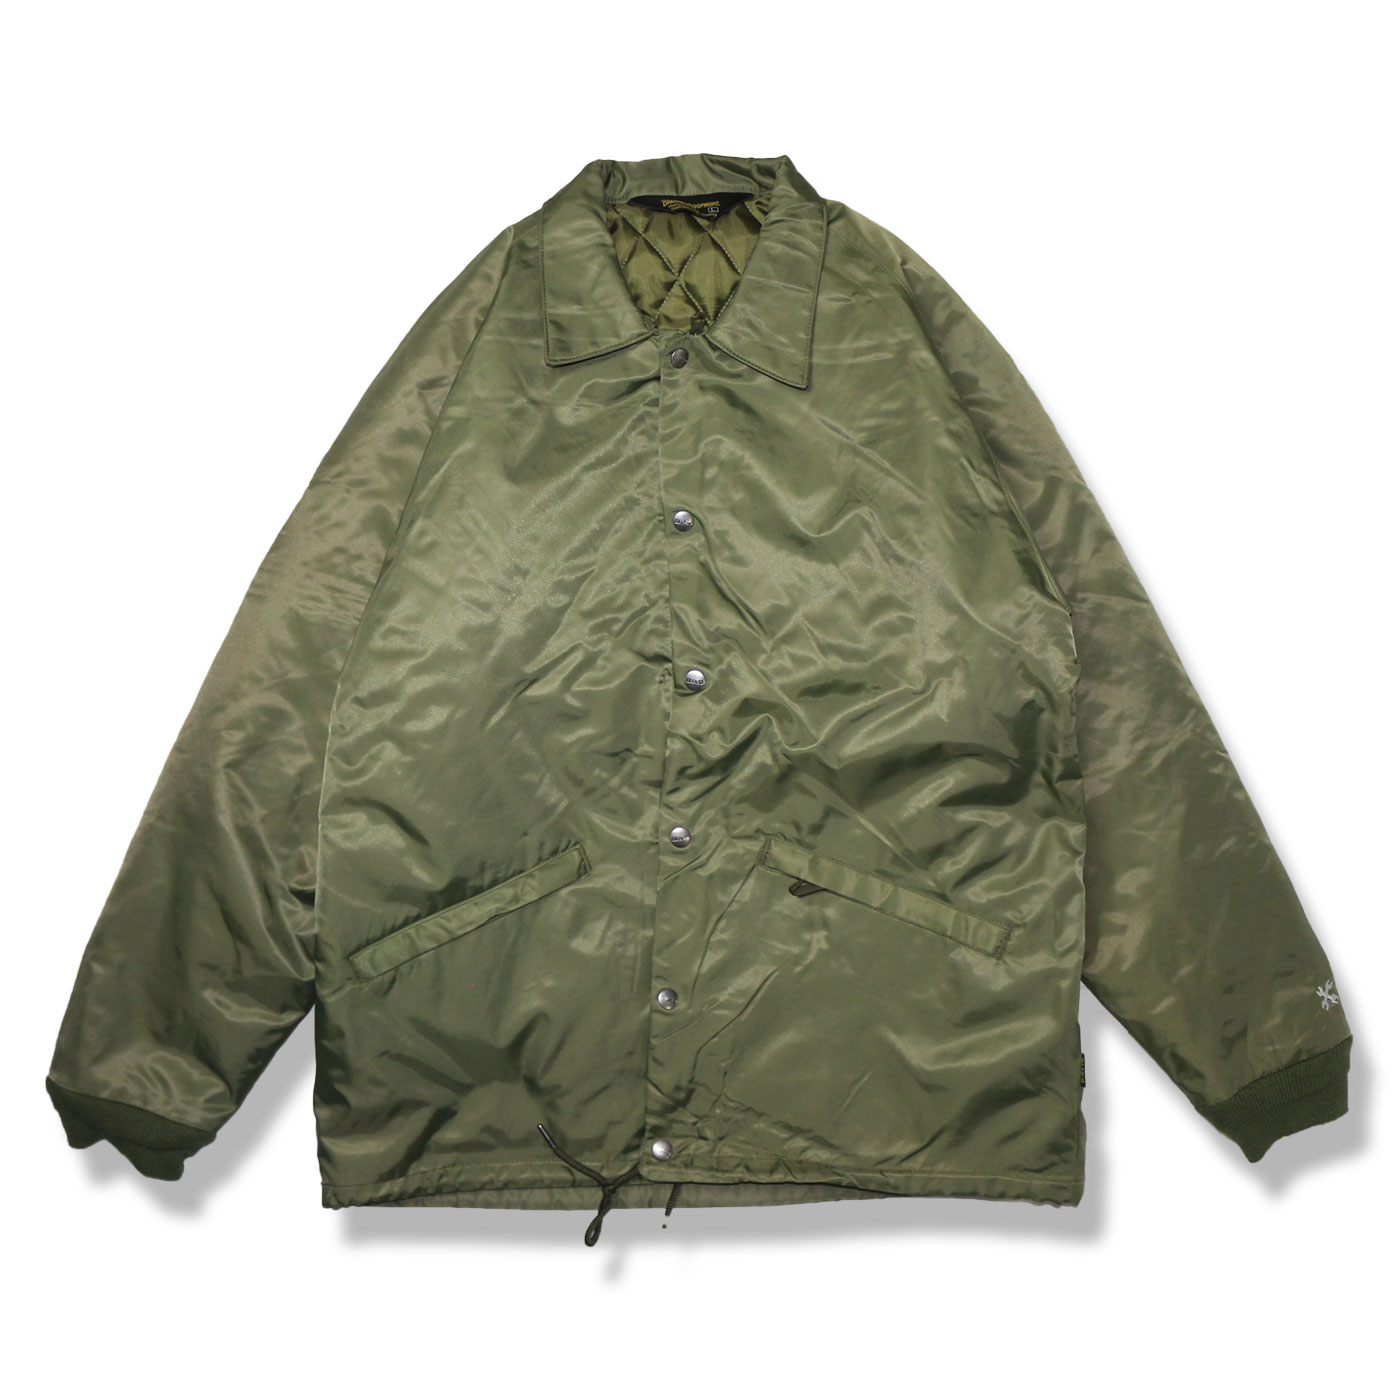 BLUCO(ブルコ) OL-051-022 QUILTING COACH JACKET 4色(BLK/BRG/NVY/OLV)☆送料無料☆｜pinsstore｜05